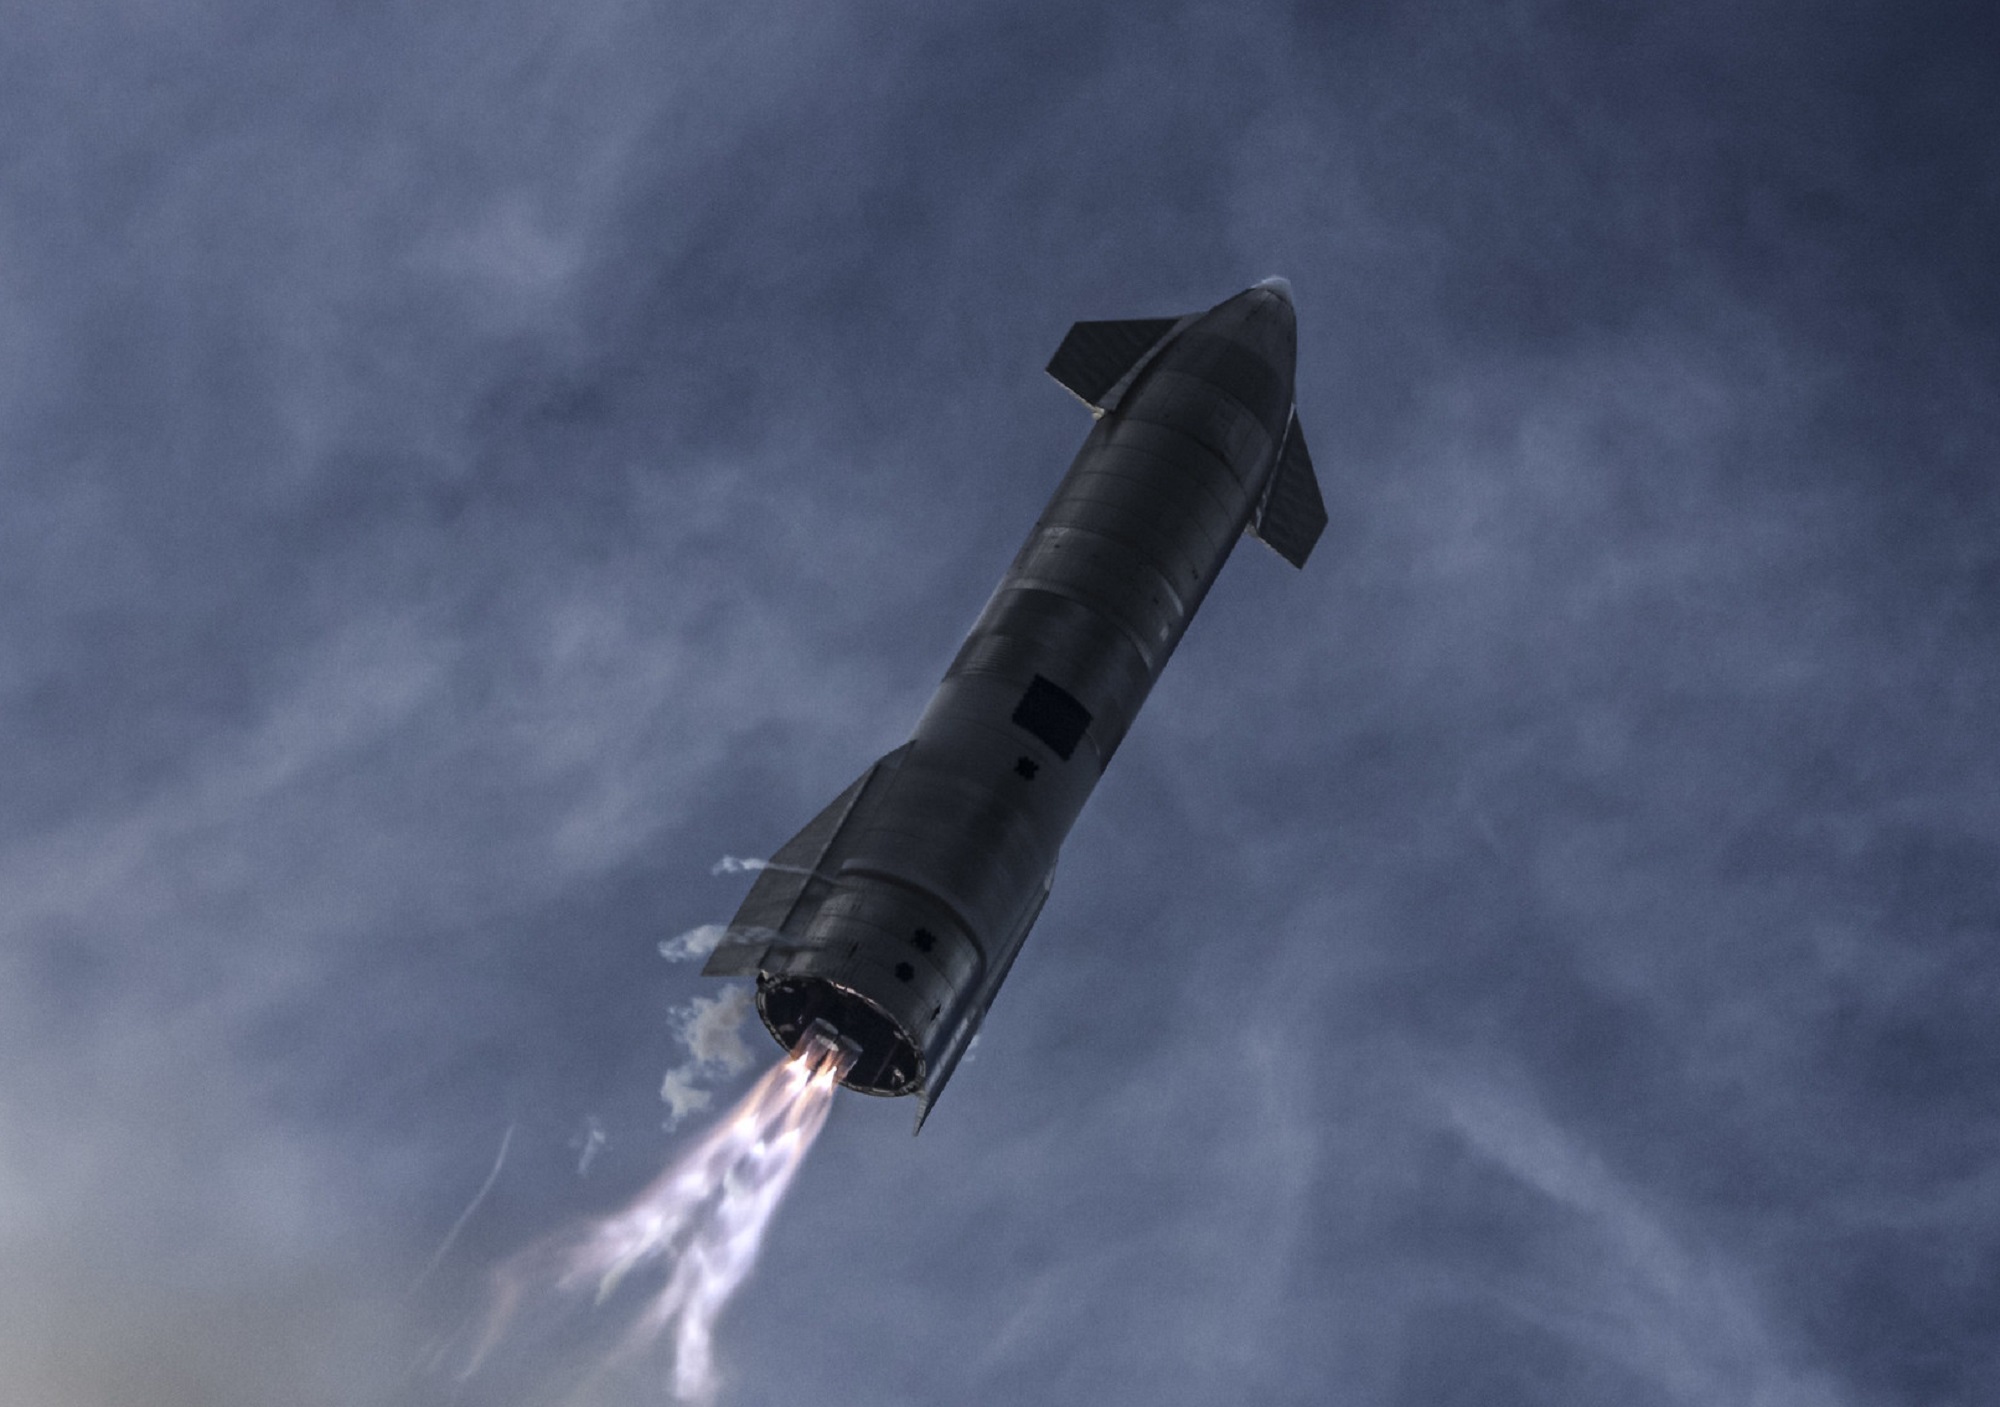 The Air Force wants $48 million to practice dropping stuff from rockets